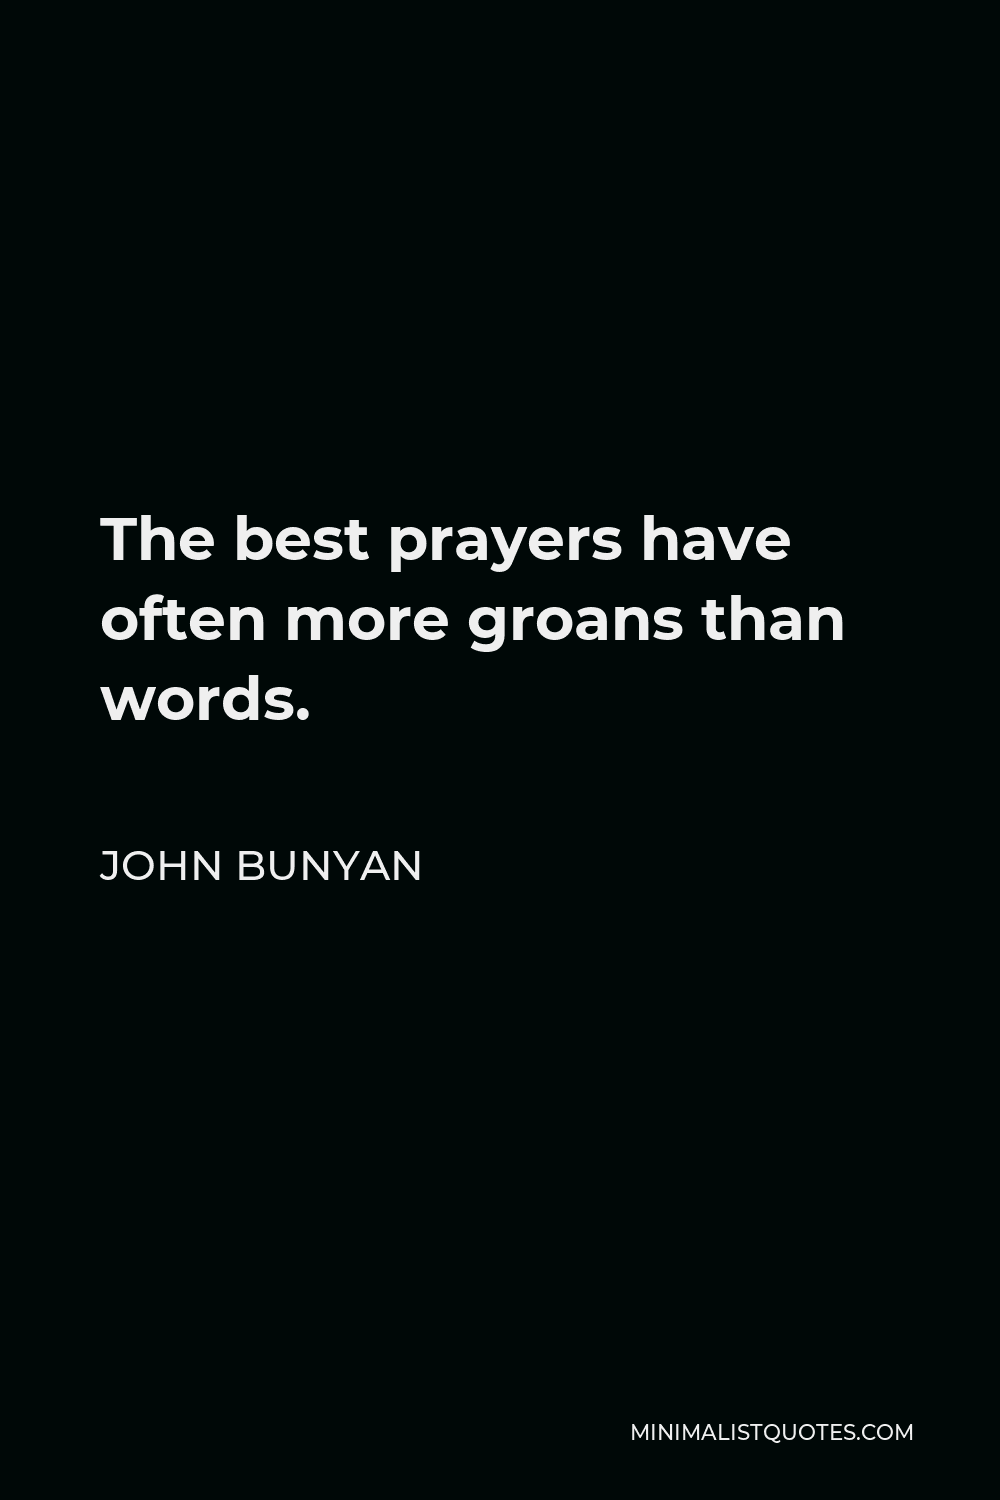 John Bunyan Quote - The best prayers have often more groans than words.